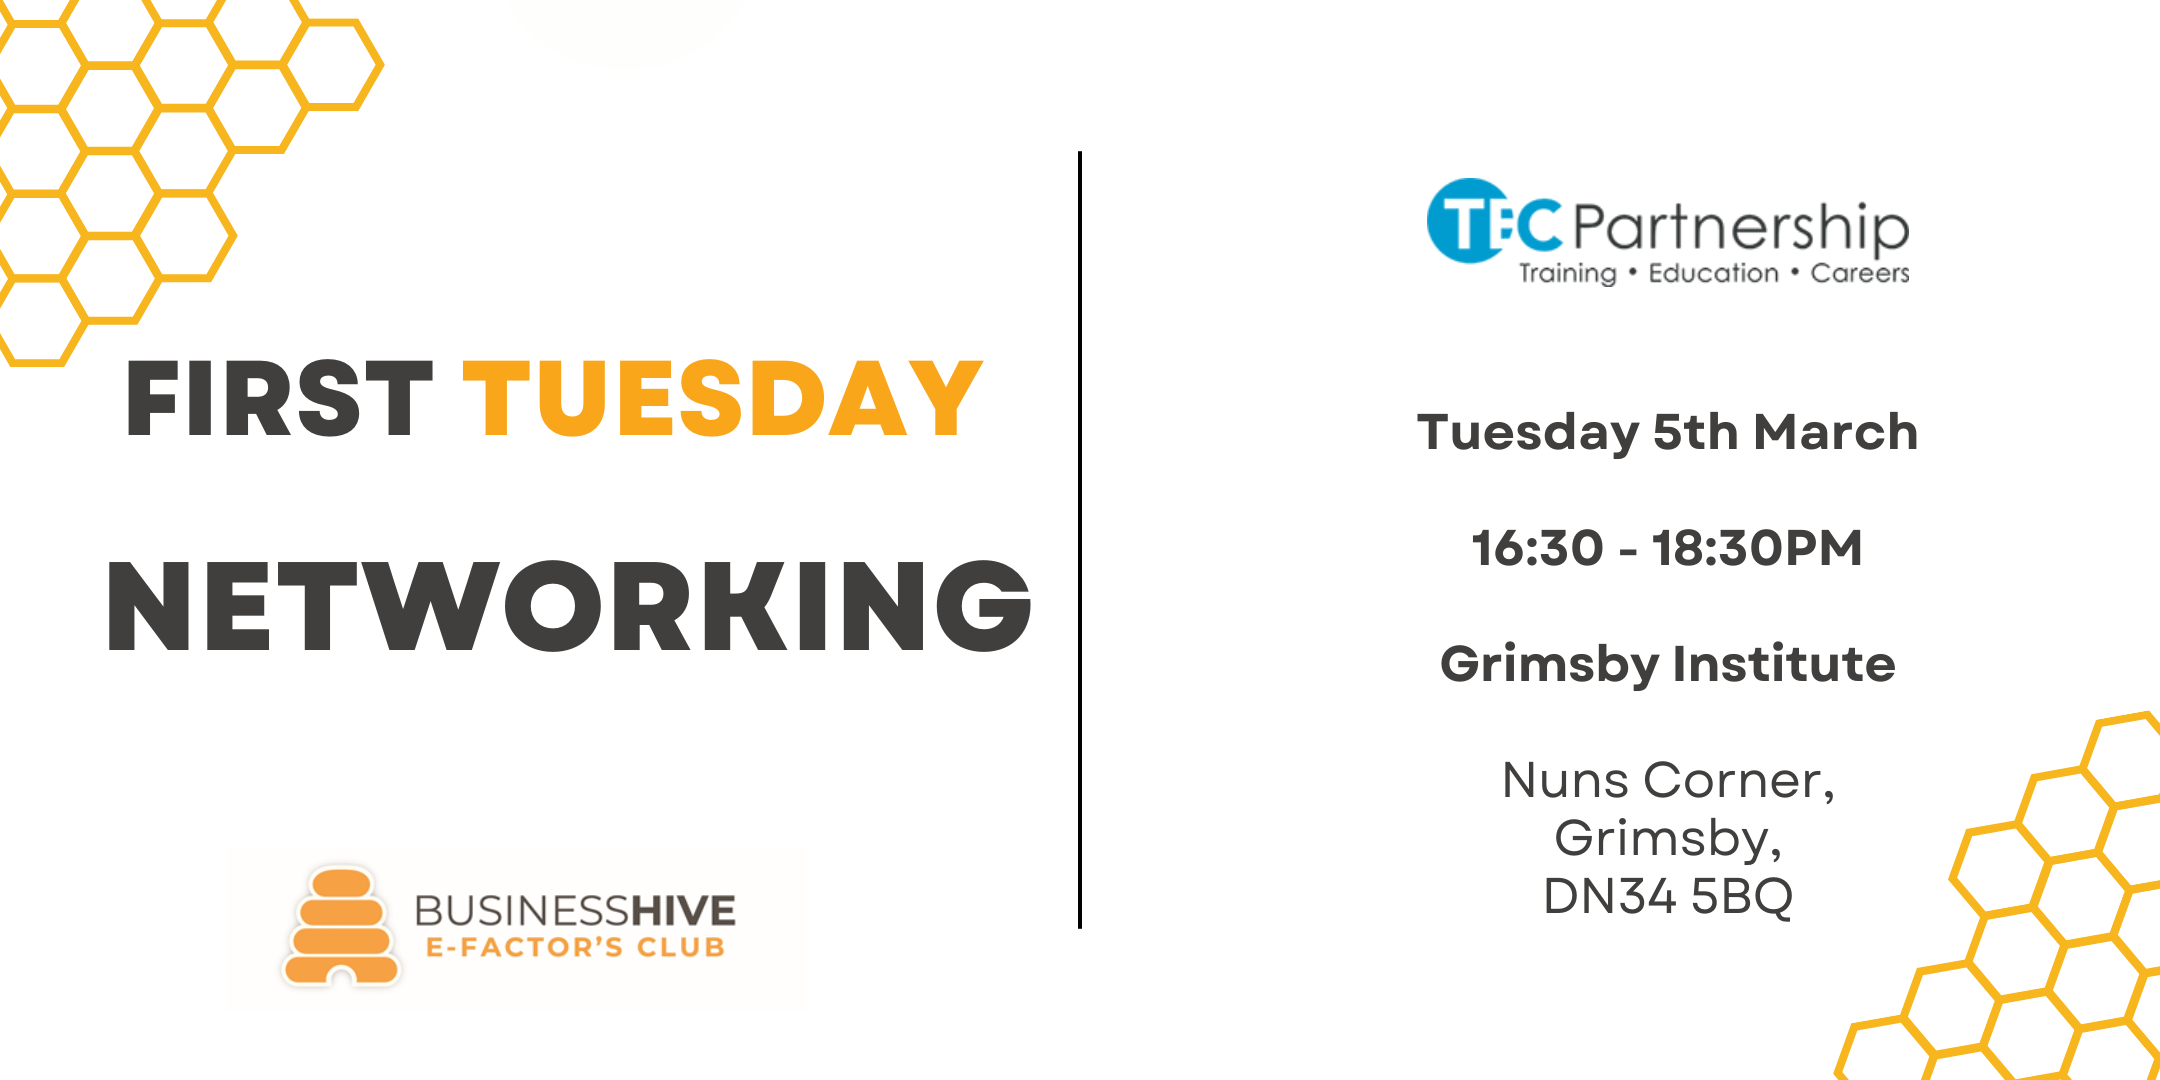 Join us for our monthly First Tuesday Networking event. Connect with professionals from various industries and expand your network. Don't miss out on this valuable opportunity to meet new contacts and build relationships that can propel your